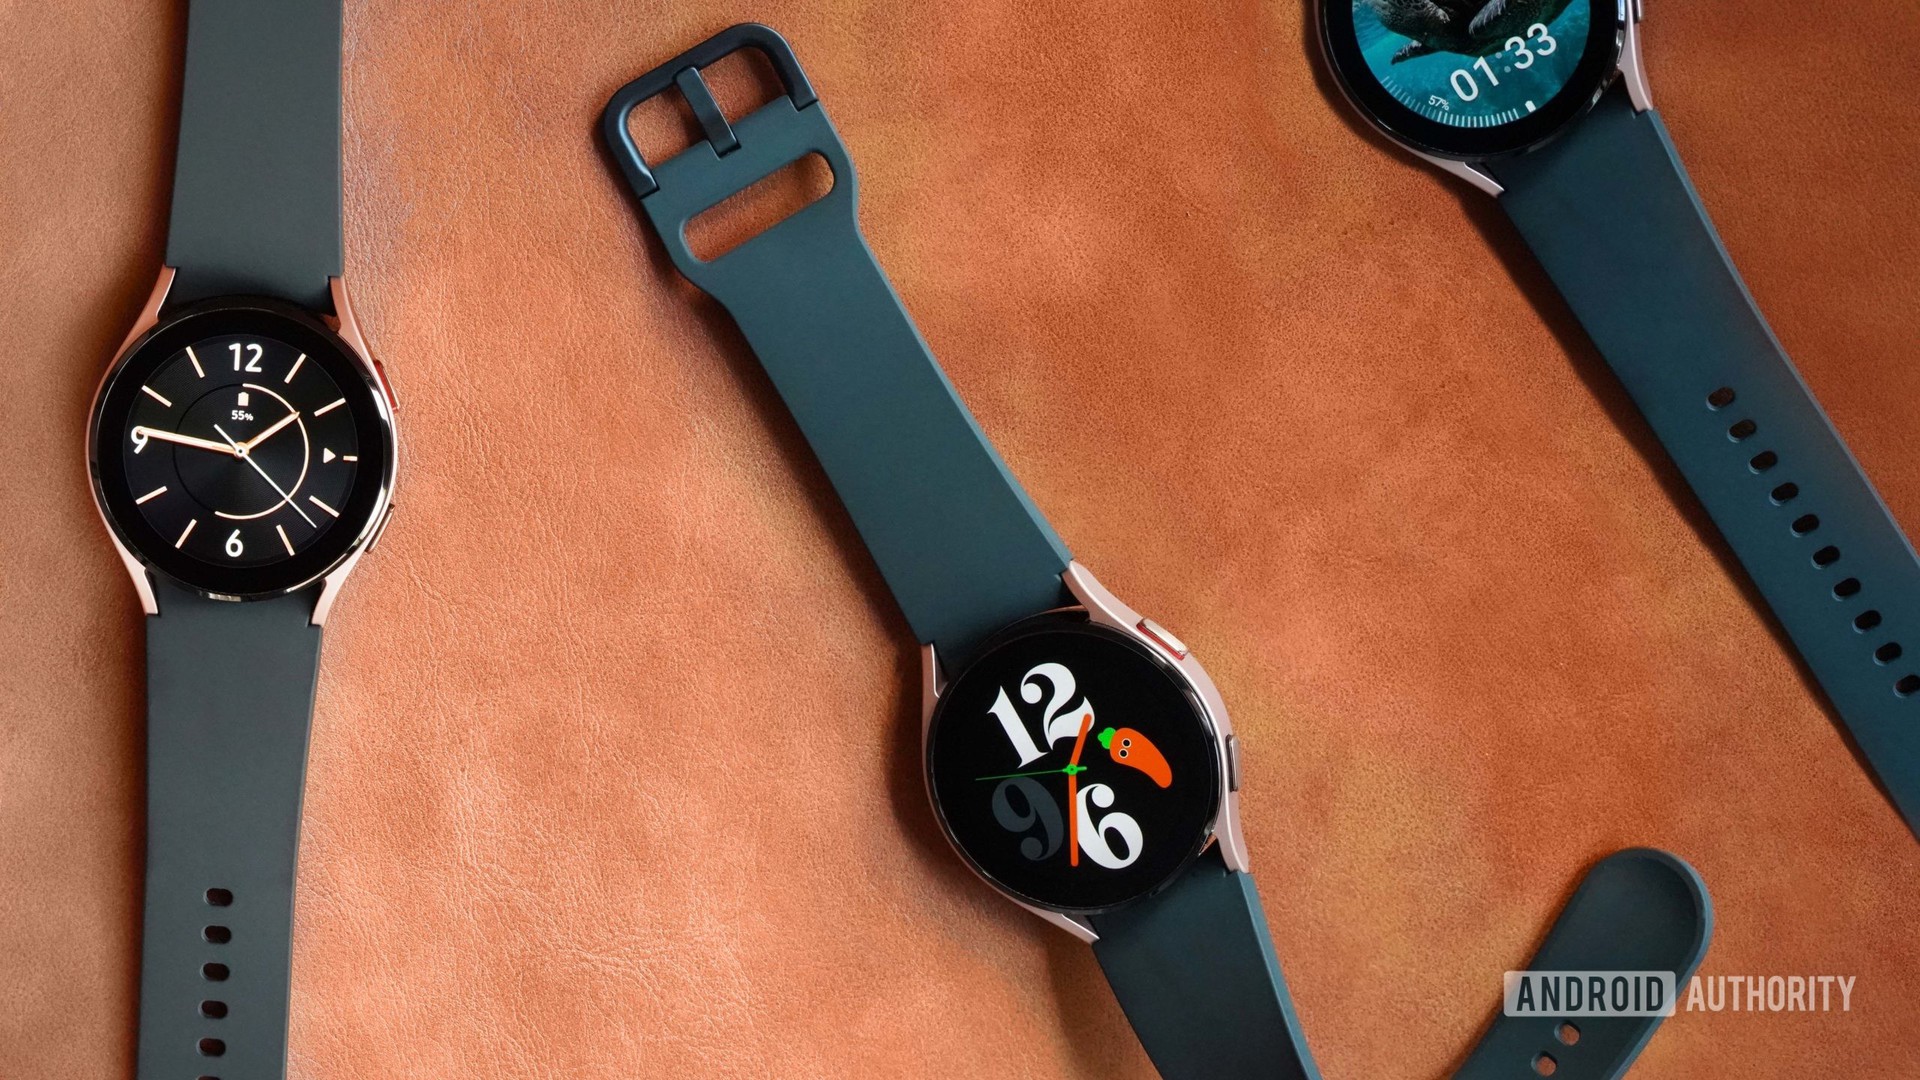 Three Samsung Galaxy Watch 4s rest on a leather surface displaying custom faces.